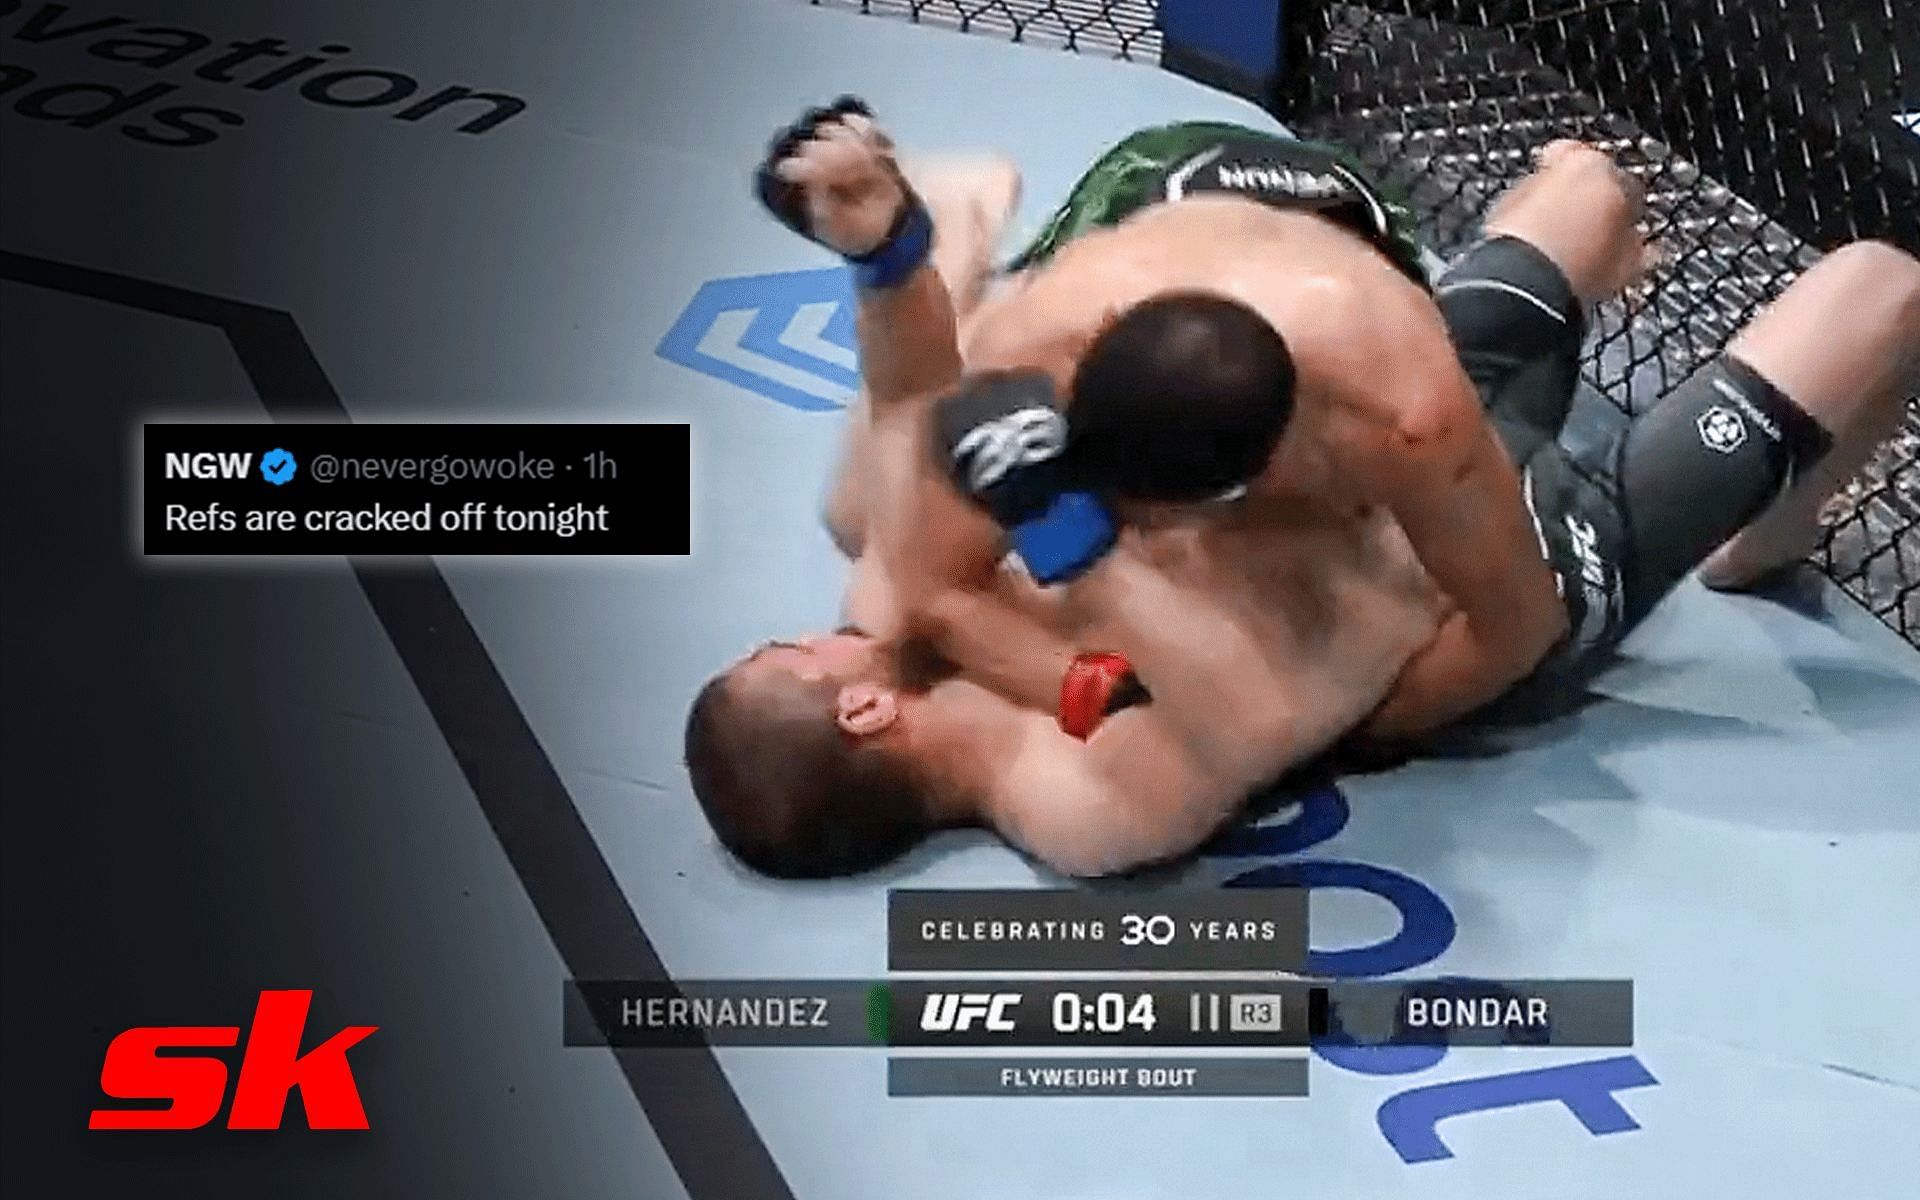 Carlos Hernandez vs. Denys Bondar ended in a controversy [Image credits: @bjpenndotcom on Twitter]